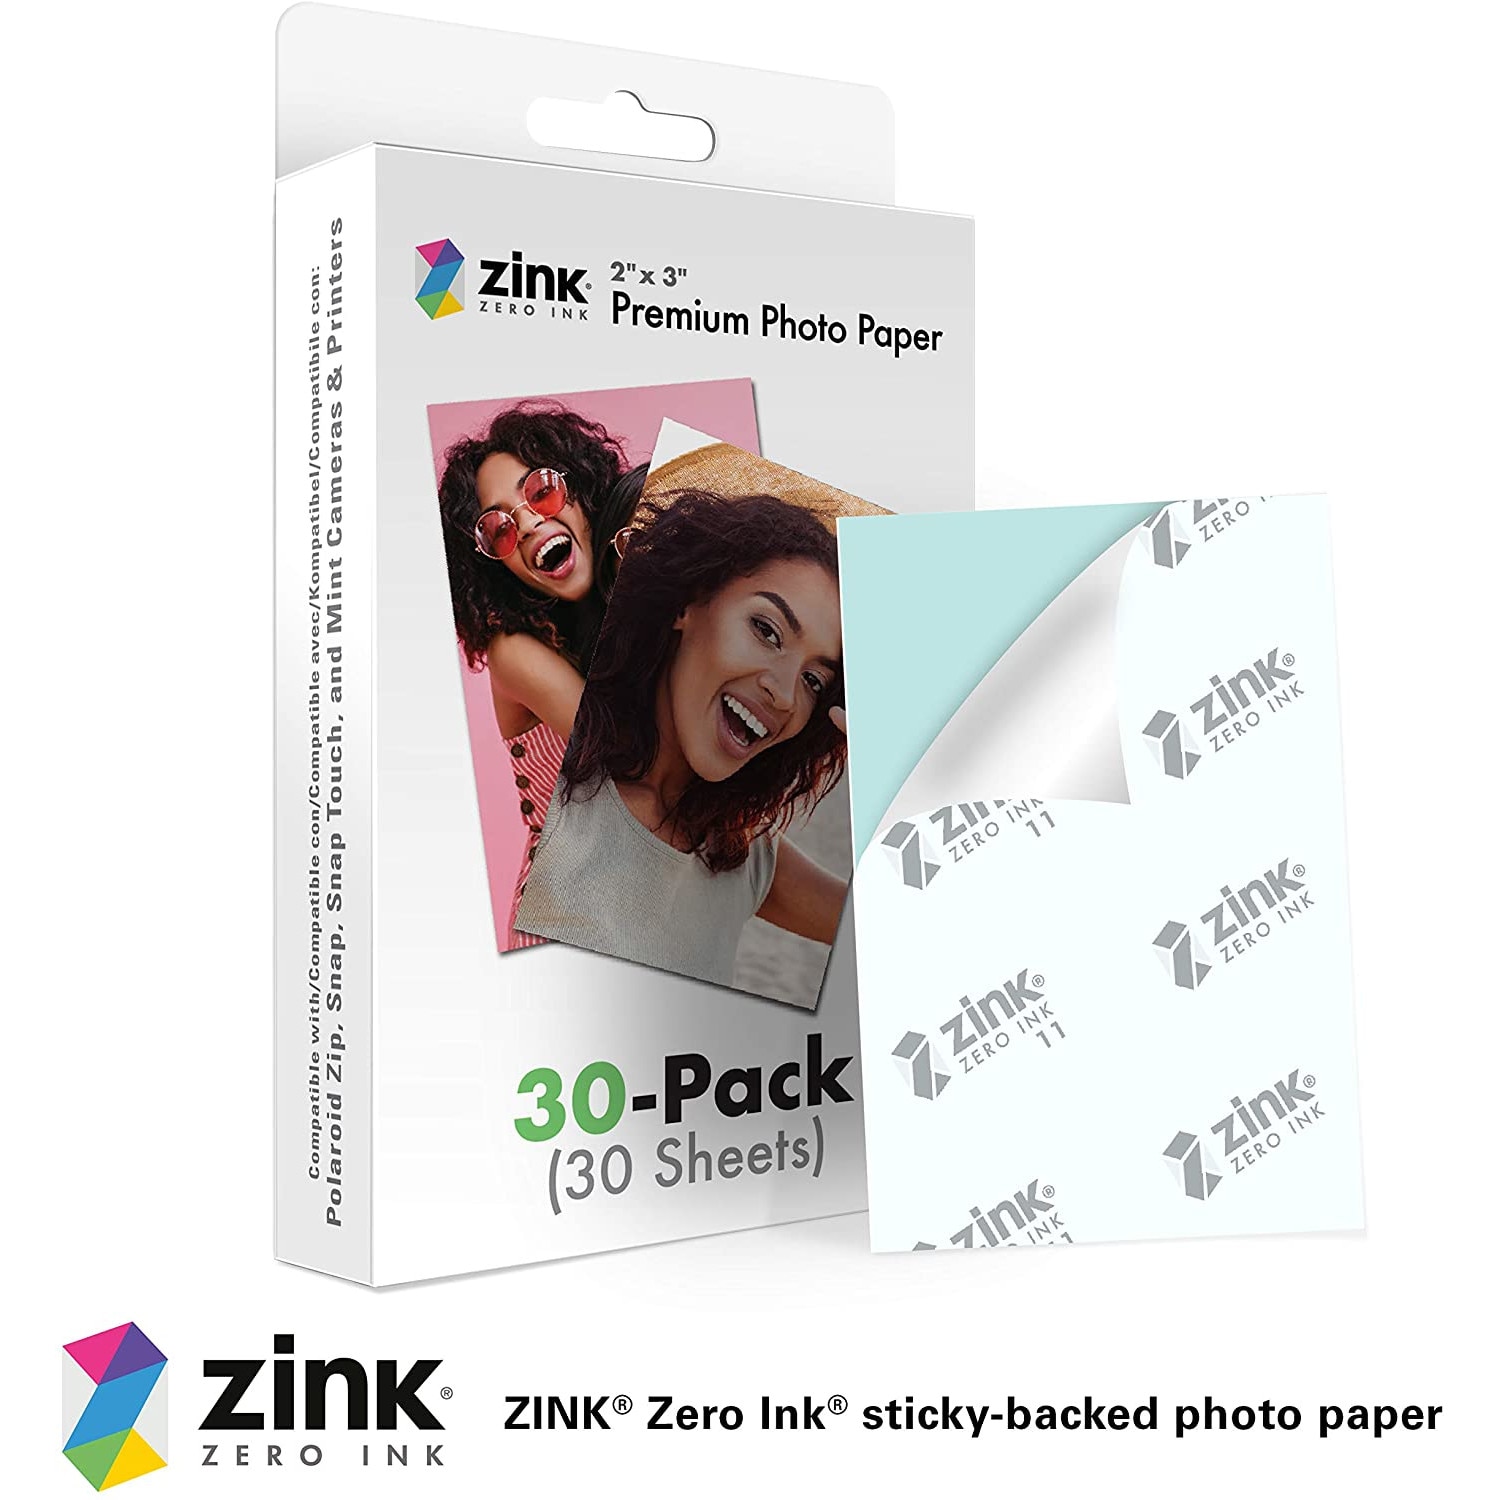 Polaroid PL2X3SPARTY Colorful & Decorative Party Stickers for 2x3 Photo Paper, Colorful